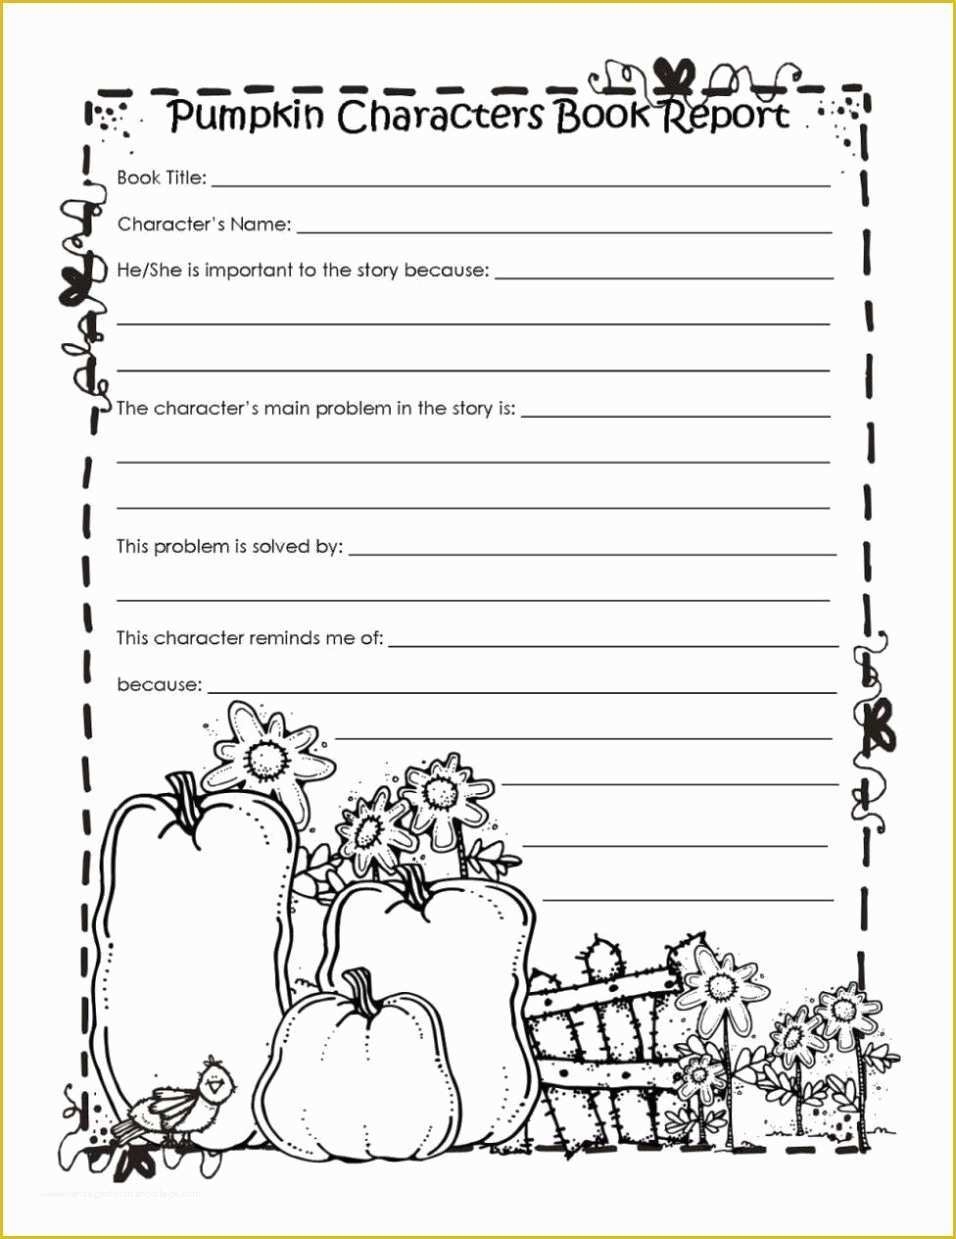 35 2Nd Grade Book Report Template Free | Heritagechristiancollege Pertaining To 2Nd Grade Book Report Template